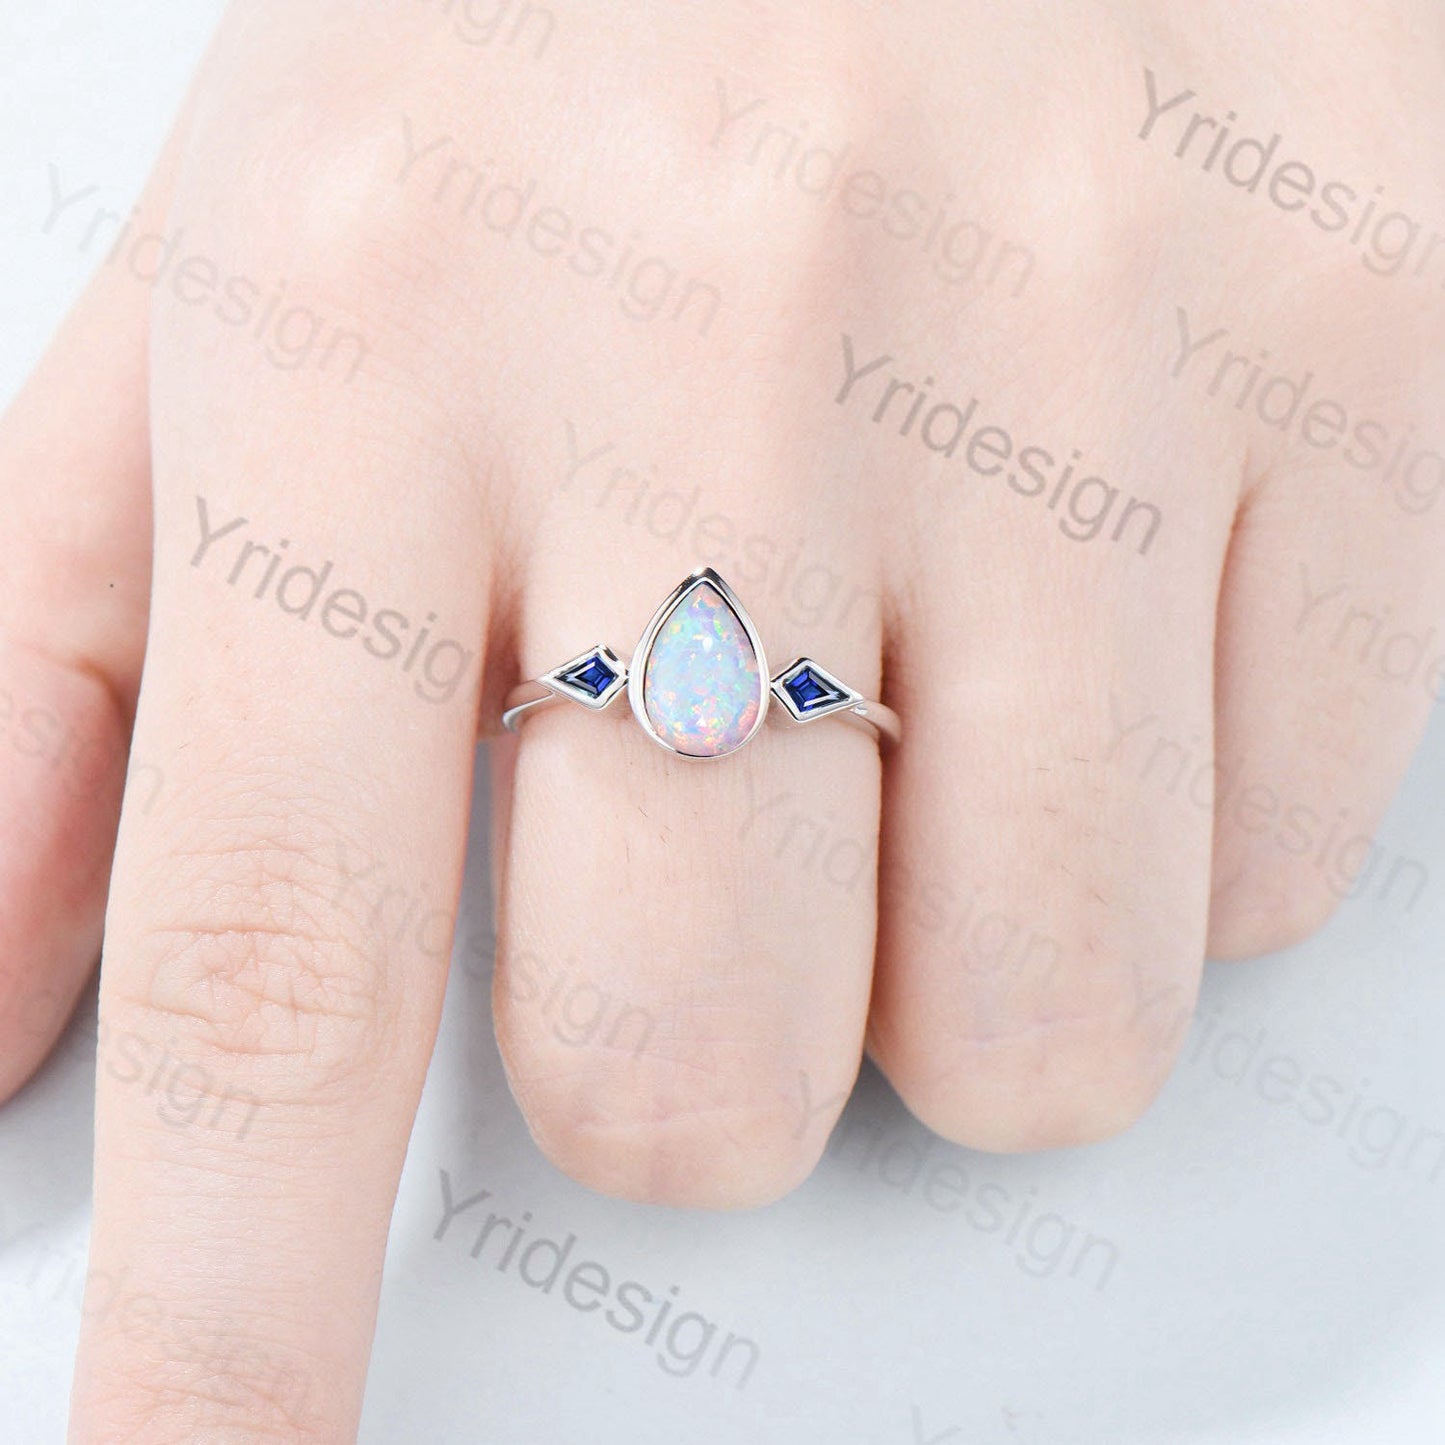 Bezel Set Opal Ring Pear Shaped White Opal Engagement Ring Vintage Minimalist Opal Sapphire Wedding Ring For Women Three Stone Promise Ring - PENFINE